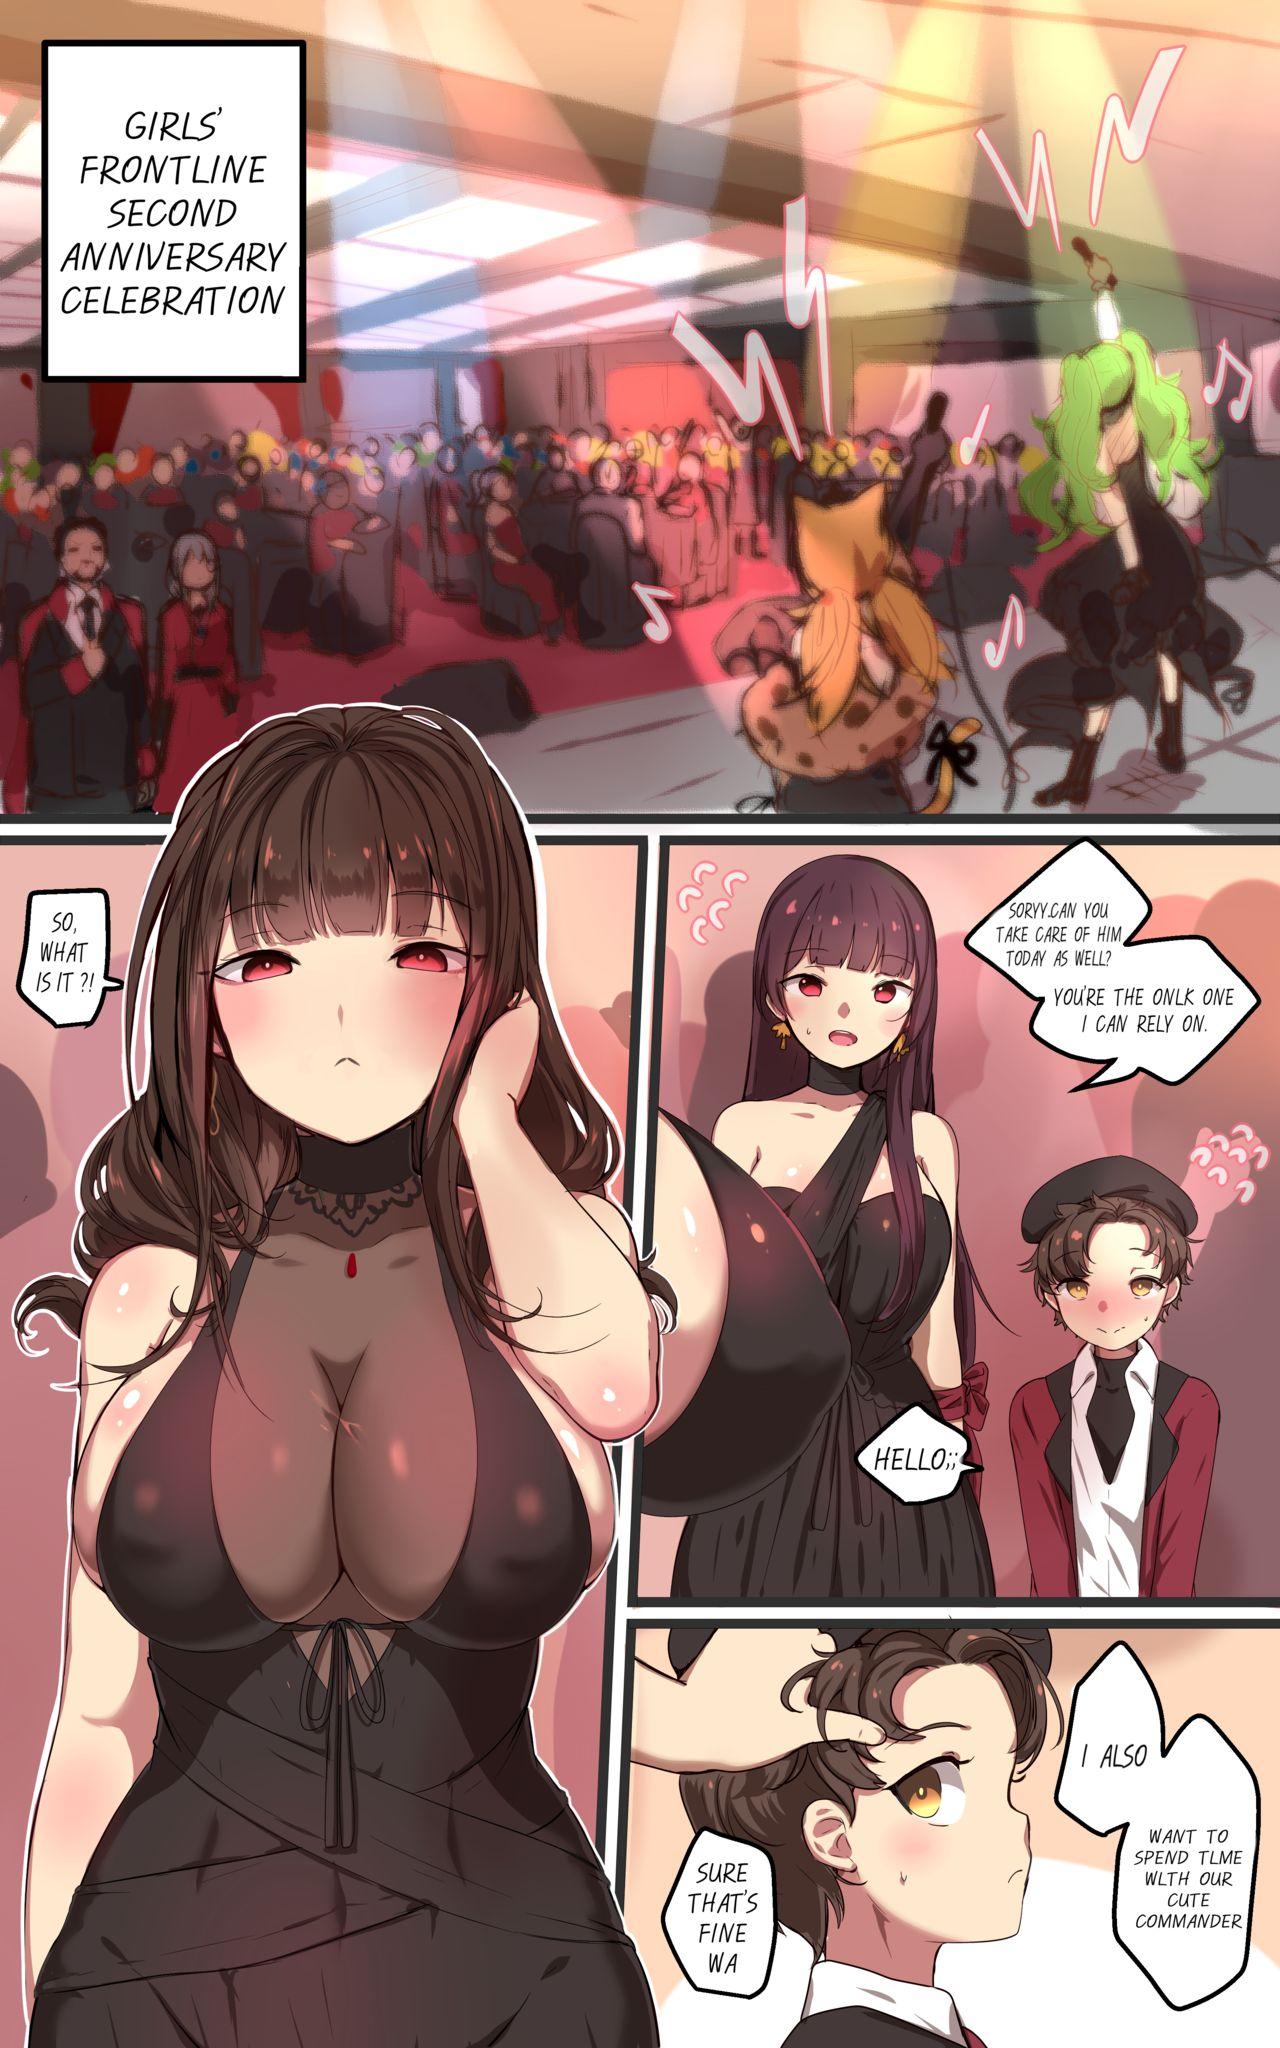 Fucking How to use dolls 07 - Girls frontline Alt - Page 2